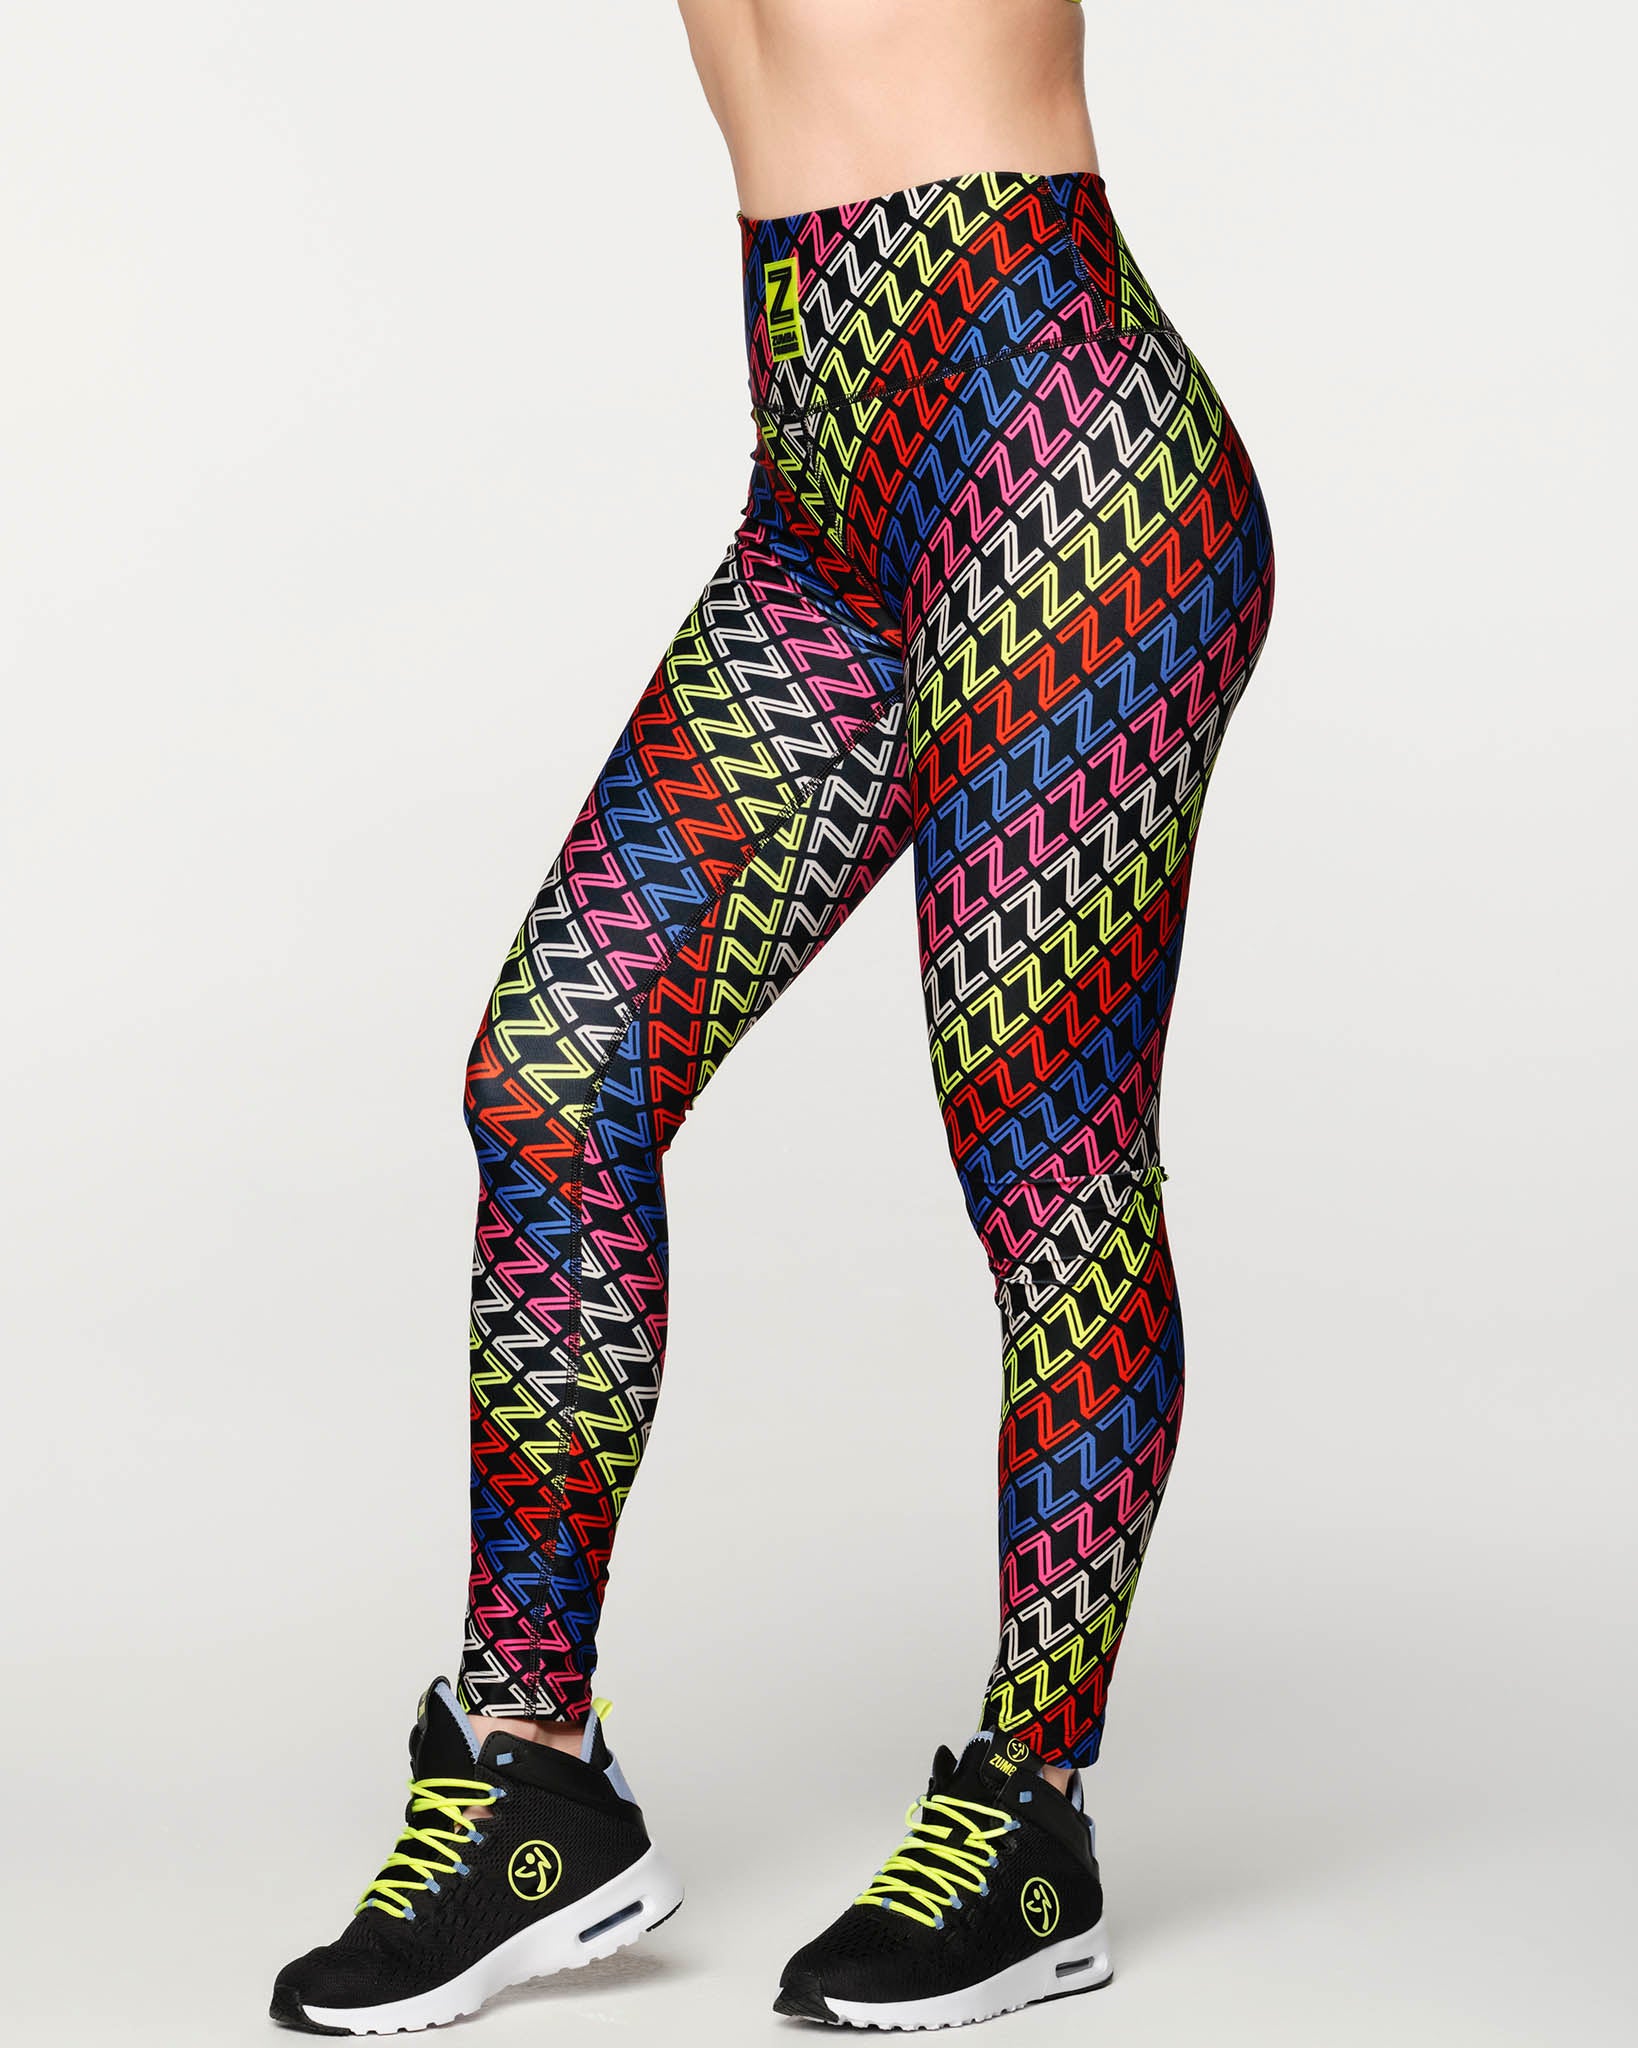 It's a Colorful Whirled Plus Size Leggings – Rochelle Porter Design